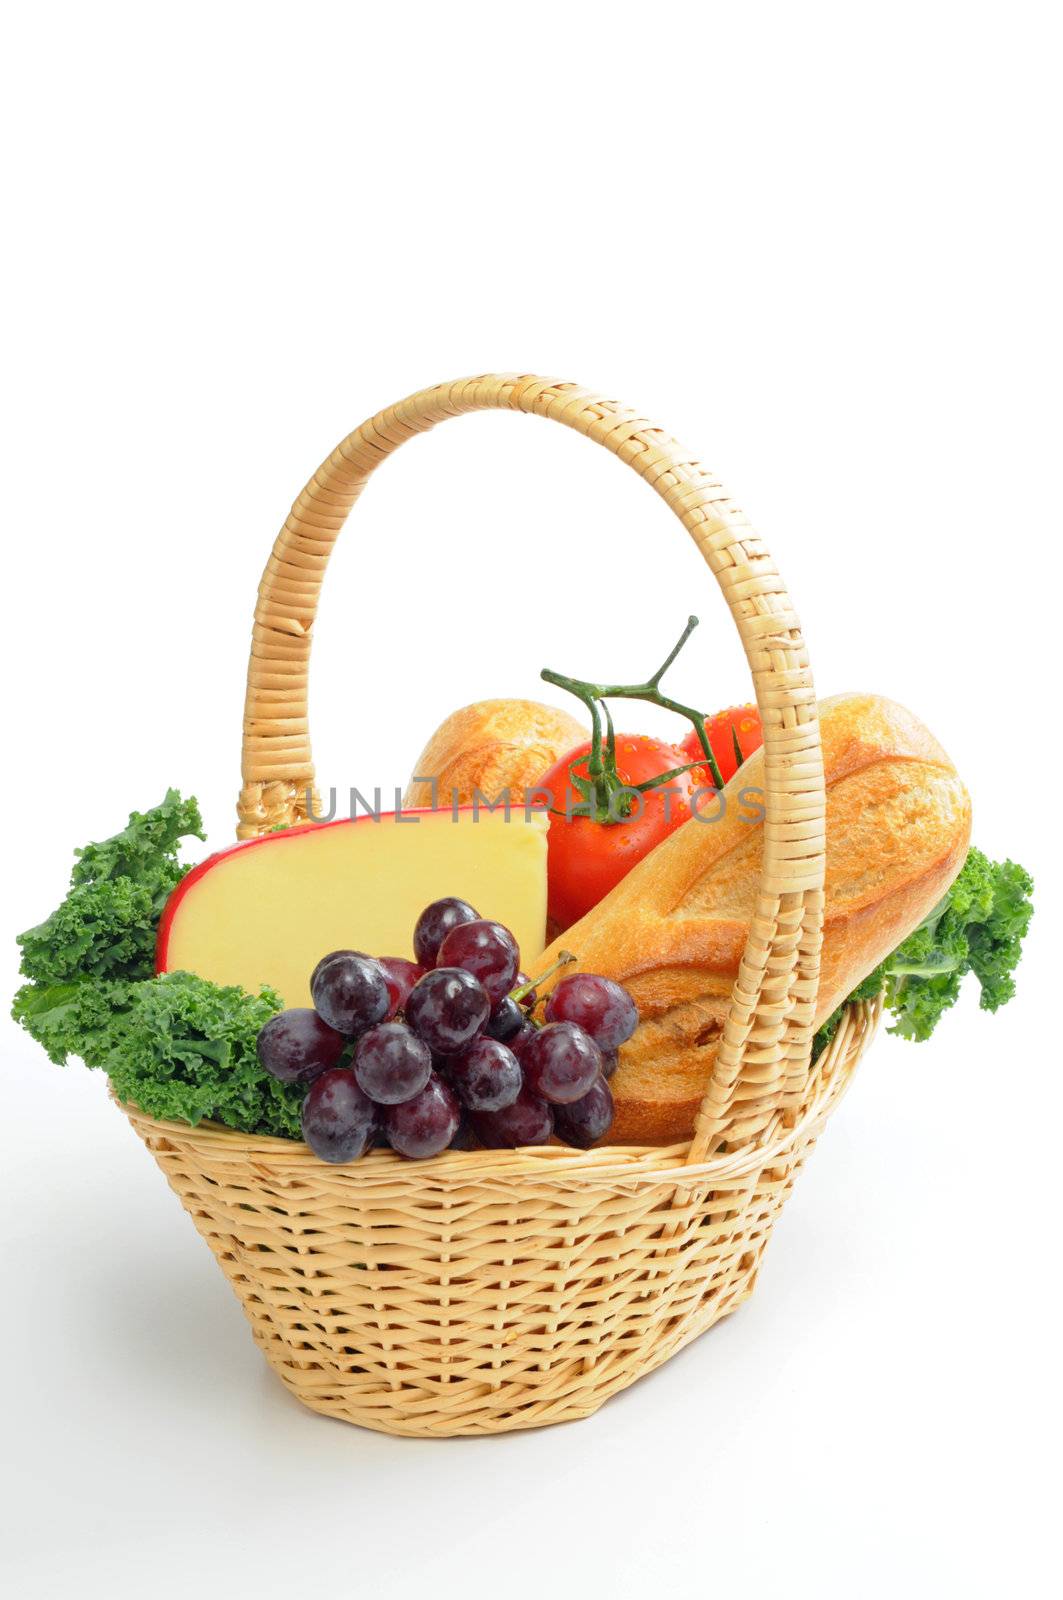 Basket of fresh bread, cheese, fruits and vegetables.